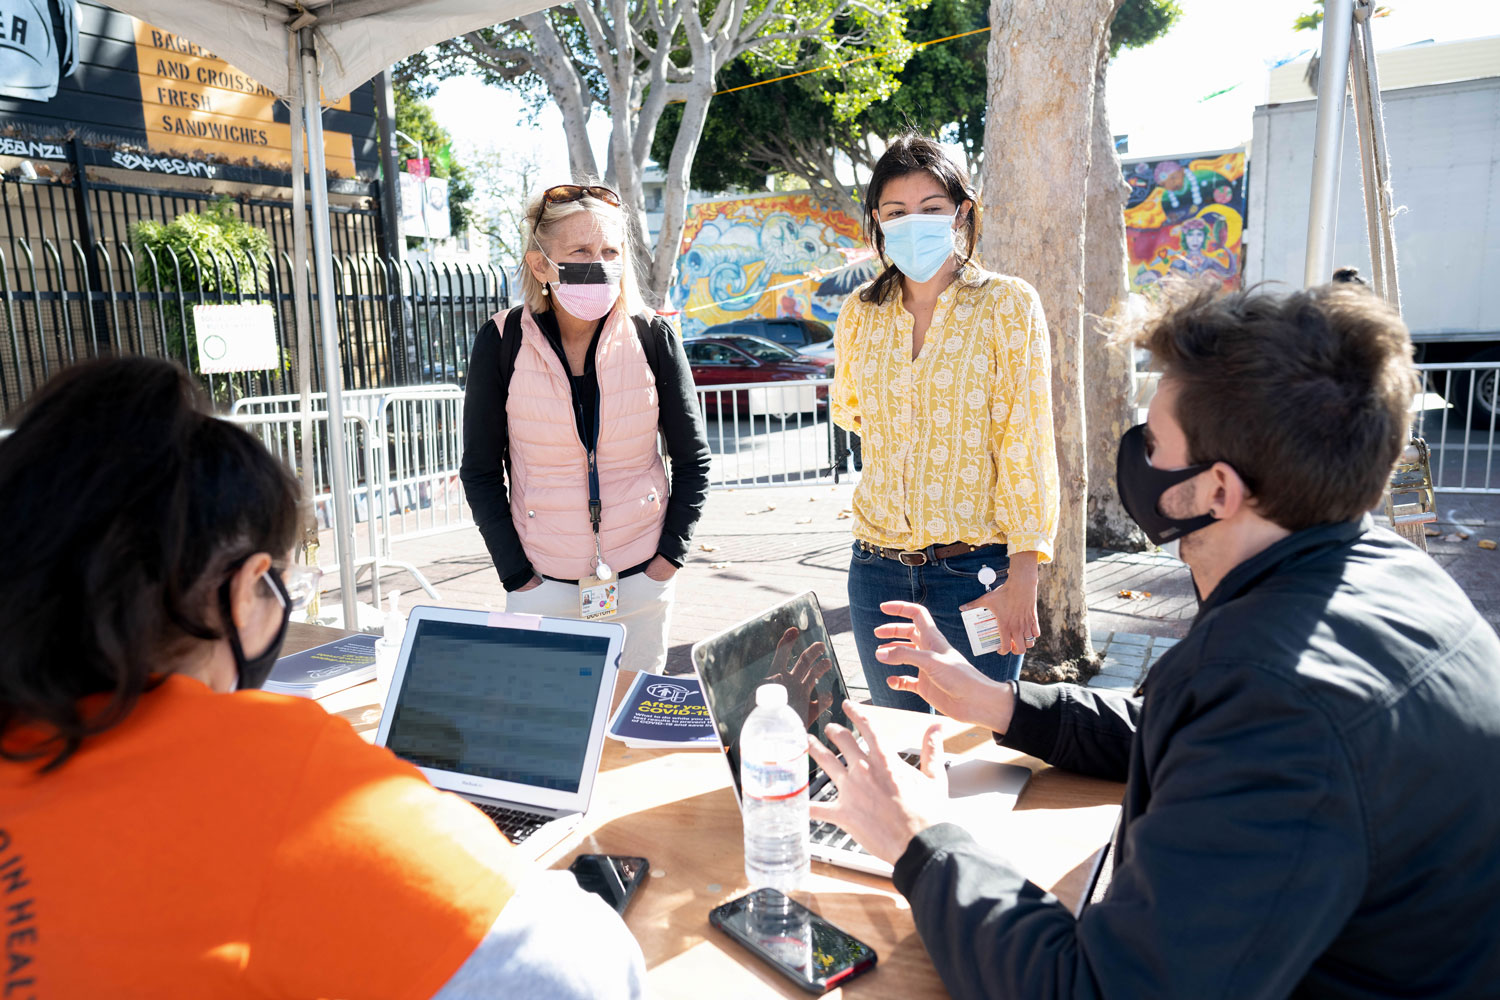 Four people talking in masks over a table outside